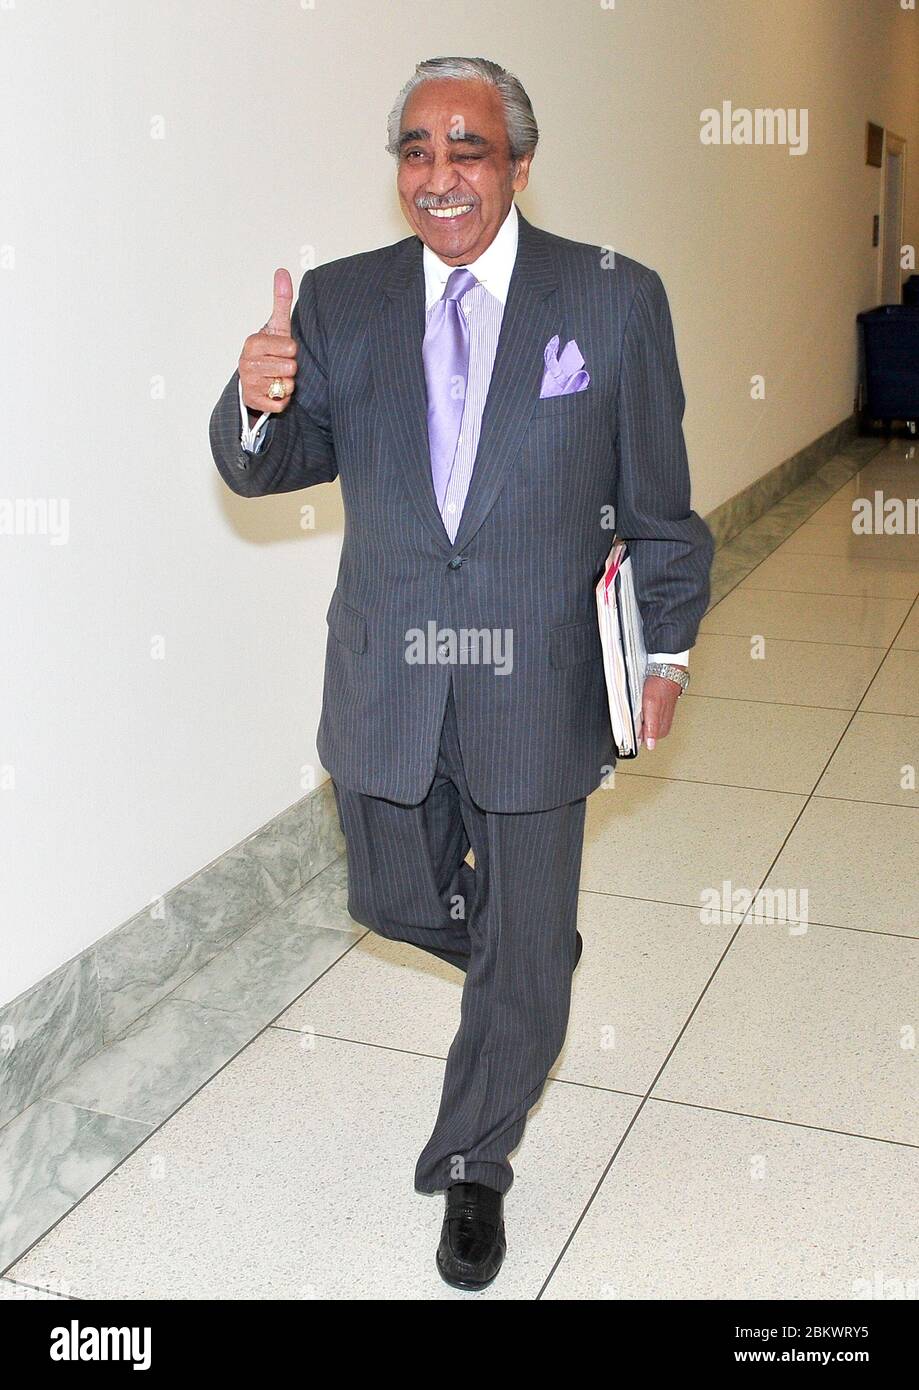 United States Representative Charlie Rangel (Democrat of New York) departs his Capitol Hill office on Tuesday, November 30, 2010.Credit: Ron Sachs / CNP  (RESTRICTION: NO New York or New Jersey Newspapers or newspapers within a 75 mile radius of New York City) / MediaPunch Stock Photo